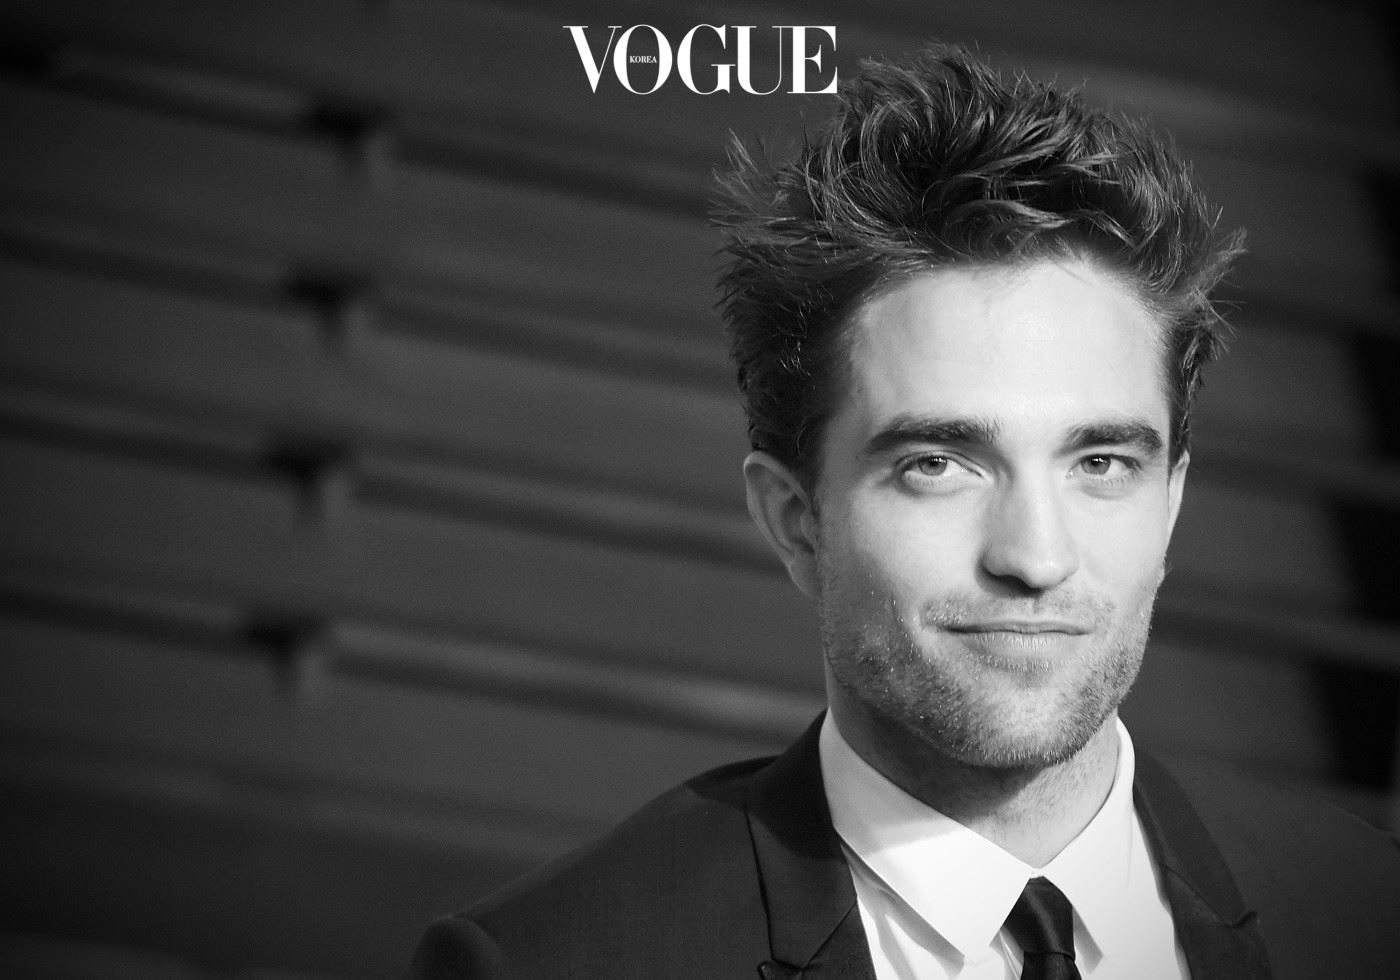 BEVERLY HILLS, CA - FEBRUARY 22:  ( Editors Note: Image processed using digital filters )  Actor Robert Pattinson attends the 2015 Vanity Fair Oscar Party at Wallis Annenberg Center for the Performing Arts on February 22, 2015 in Beverly Hills, California.  (Photo by Jason Kempin/Getty Images)